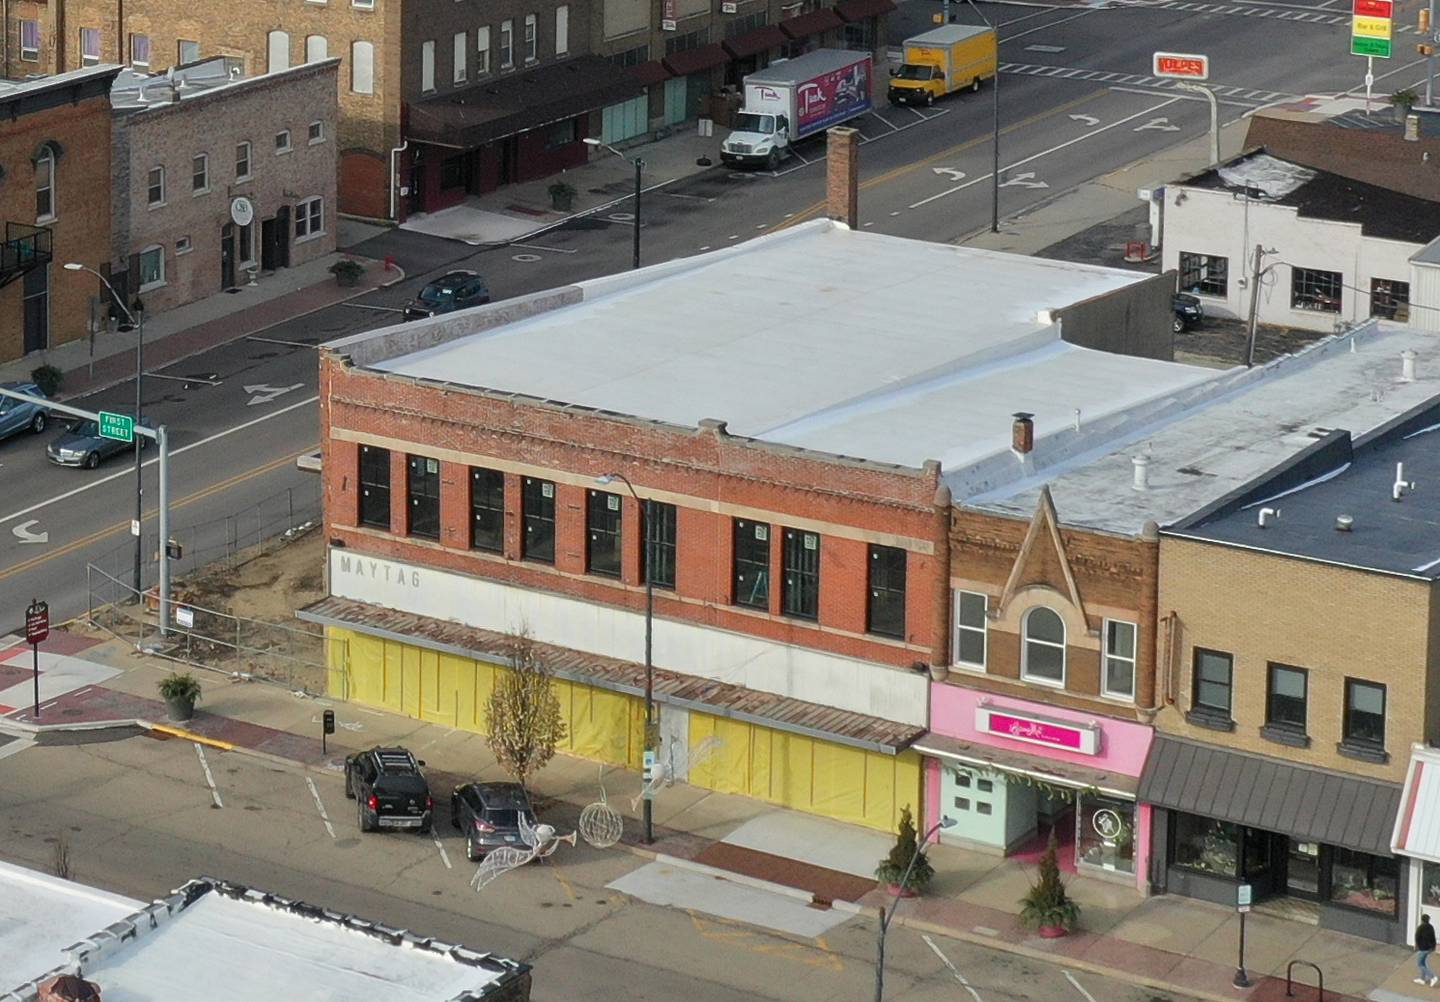 An aerial view of the The Maytag building at the corner of Illinois 351 and First Street on Monday, Jan. 9, 2023 in La Salle.